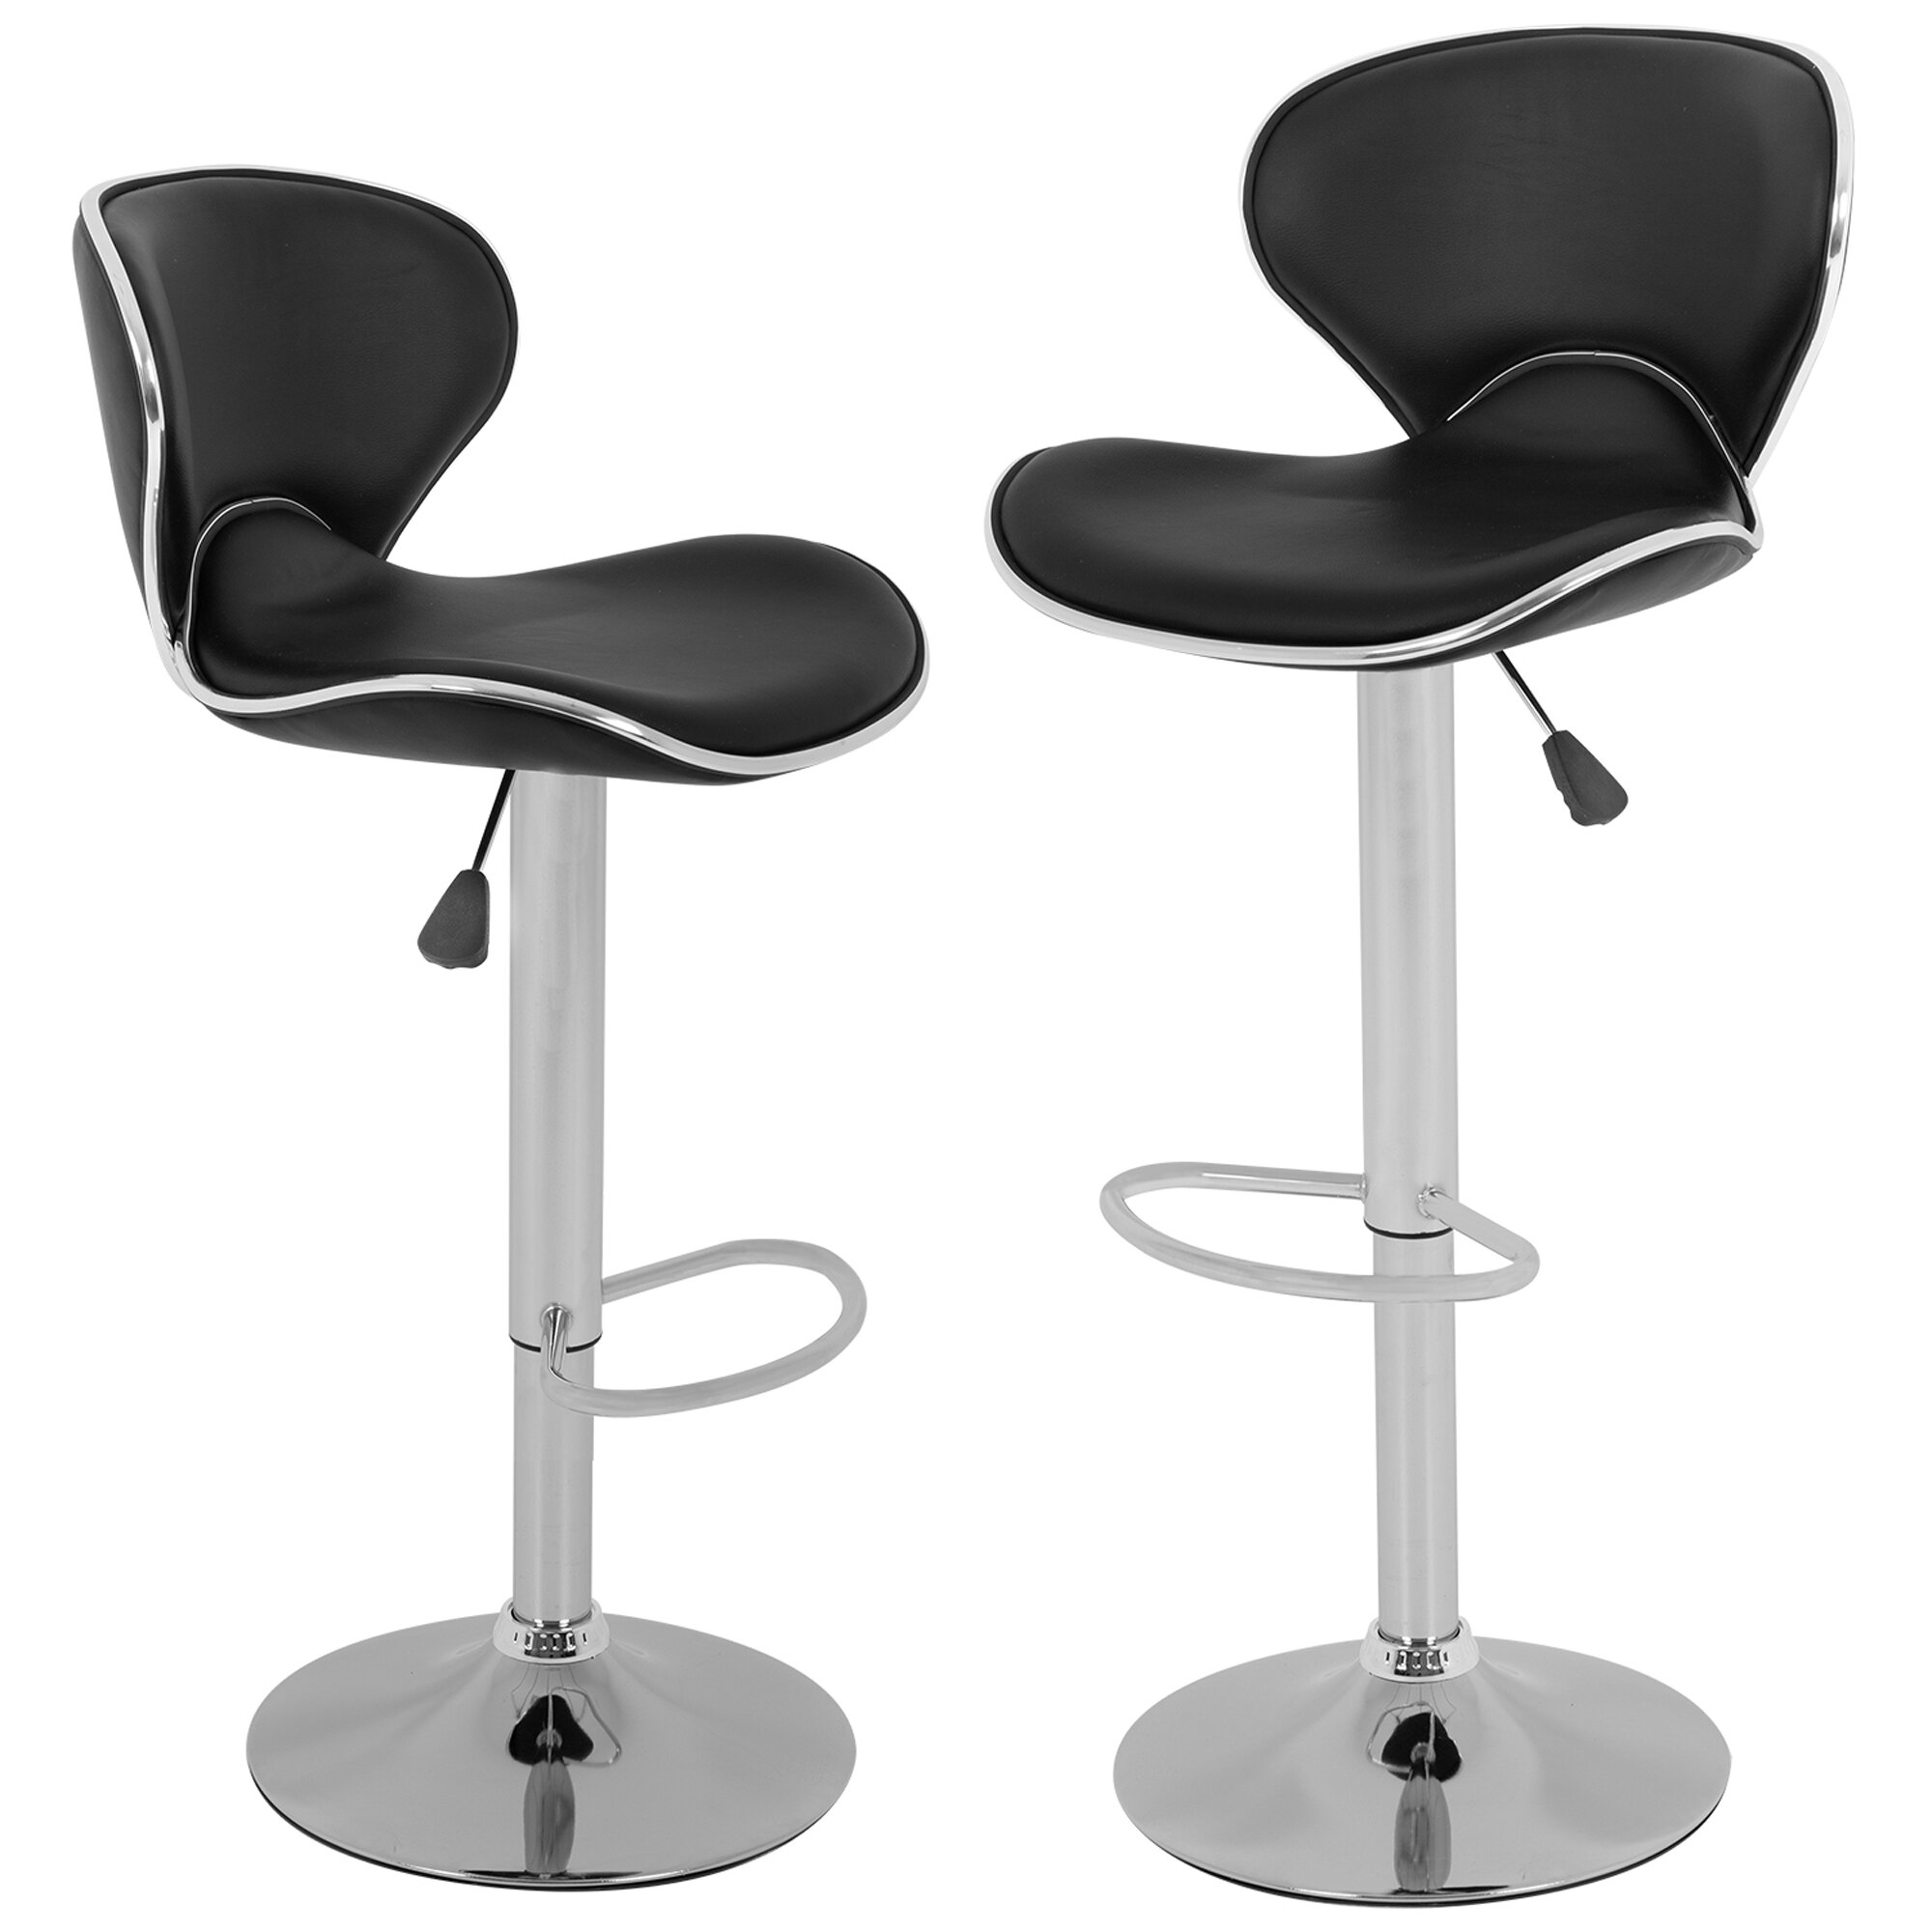 Set of 2 Bar Stools Counter Height Adjustable Leather Swivel Dining Chair 